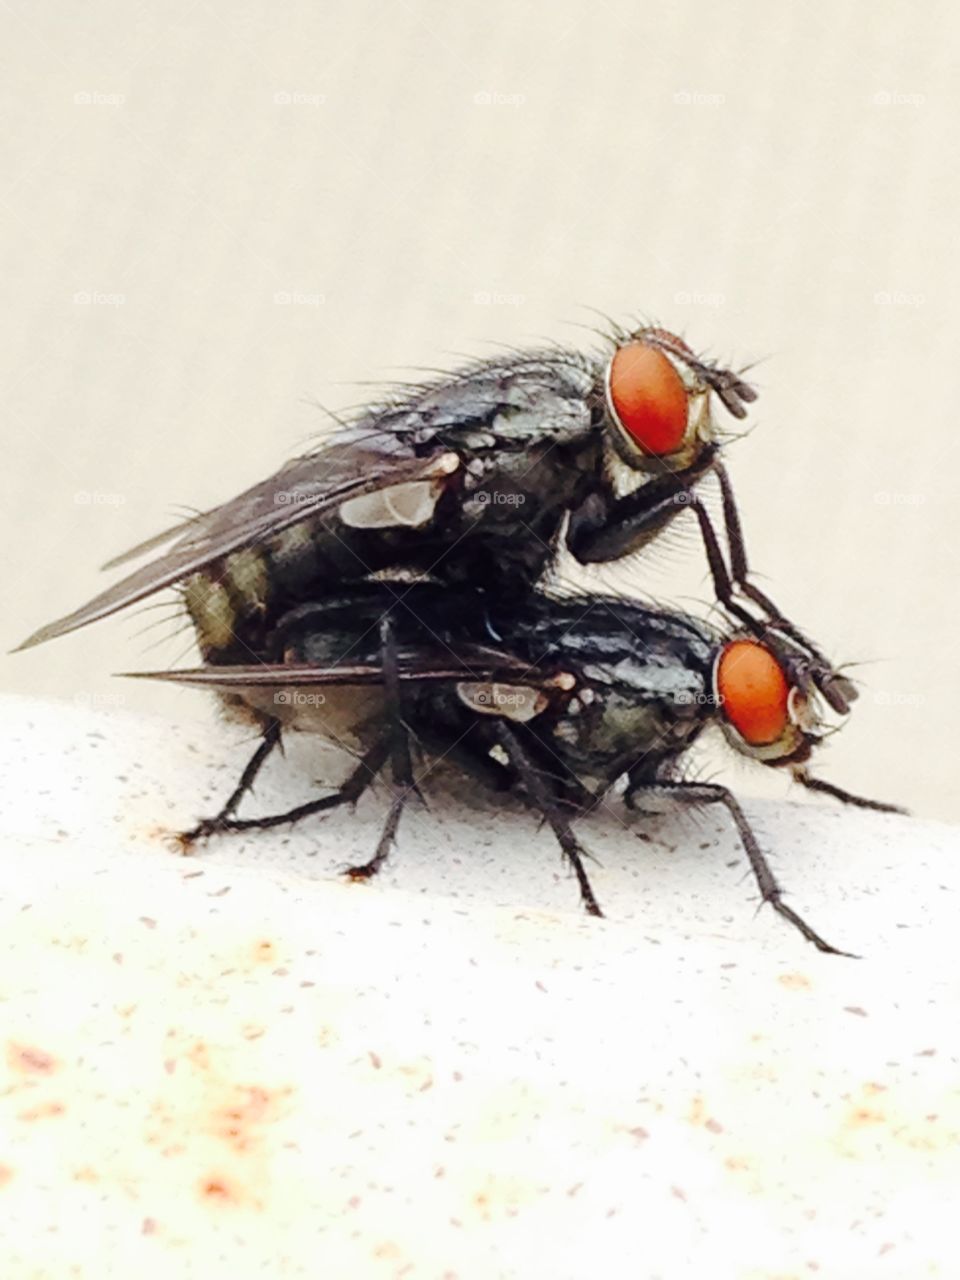 Two flys. . Mating flys